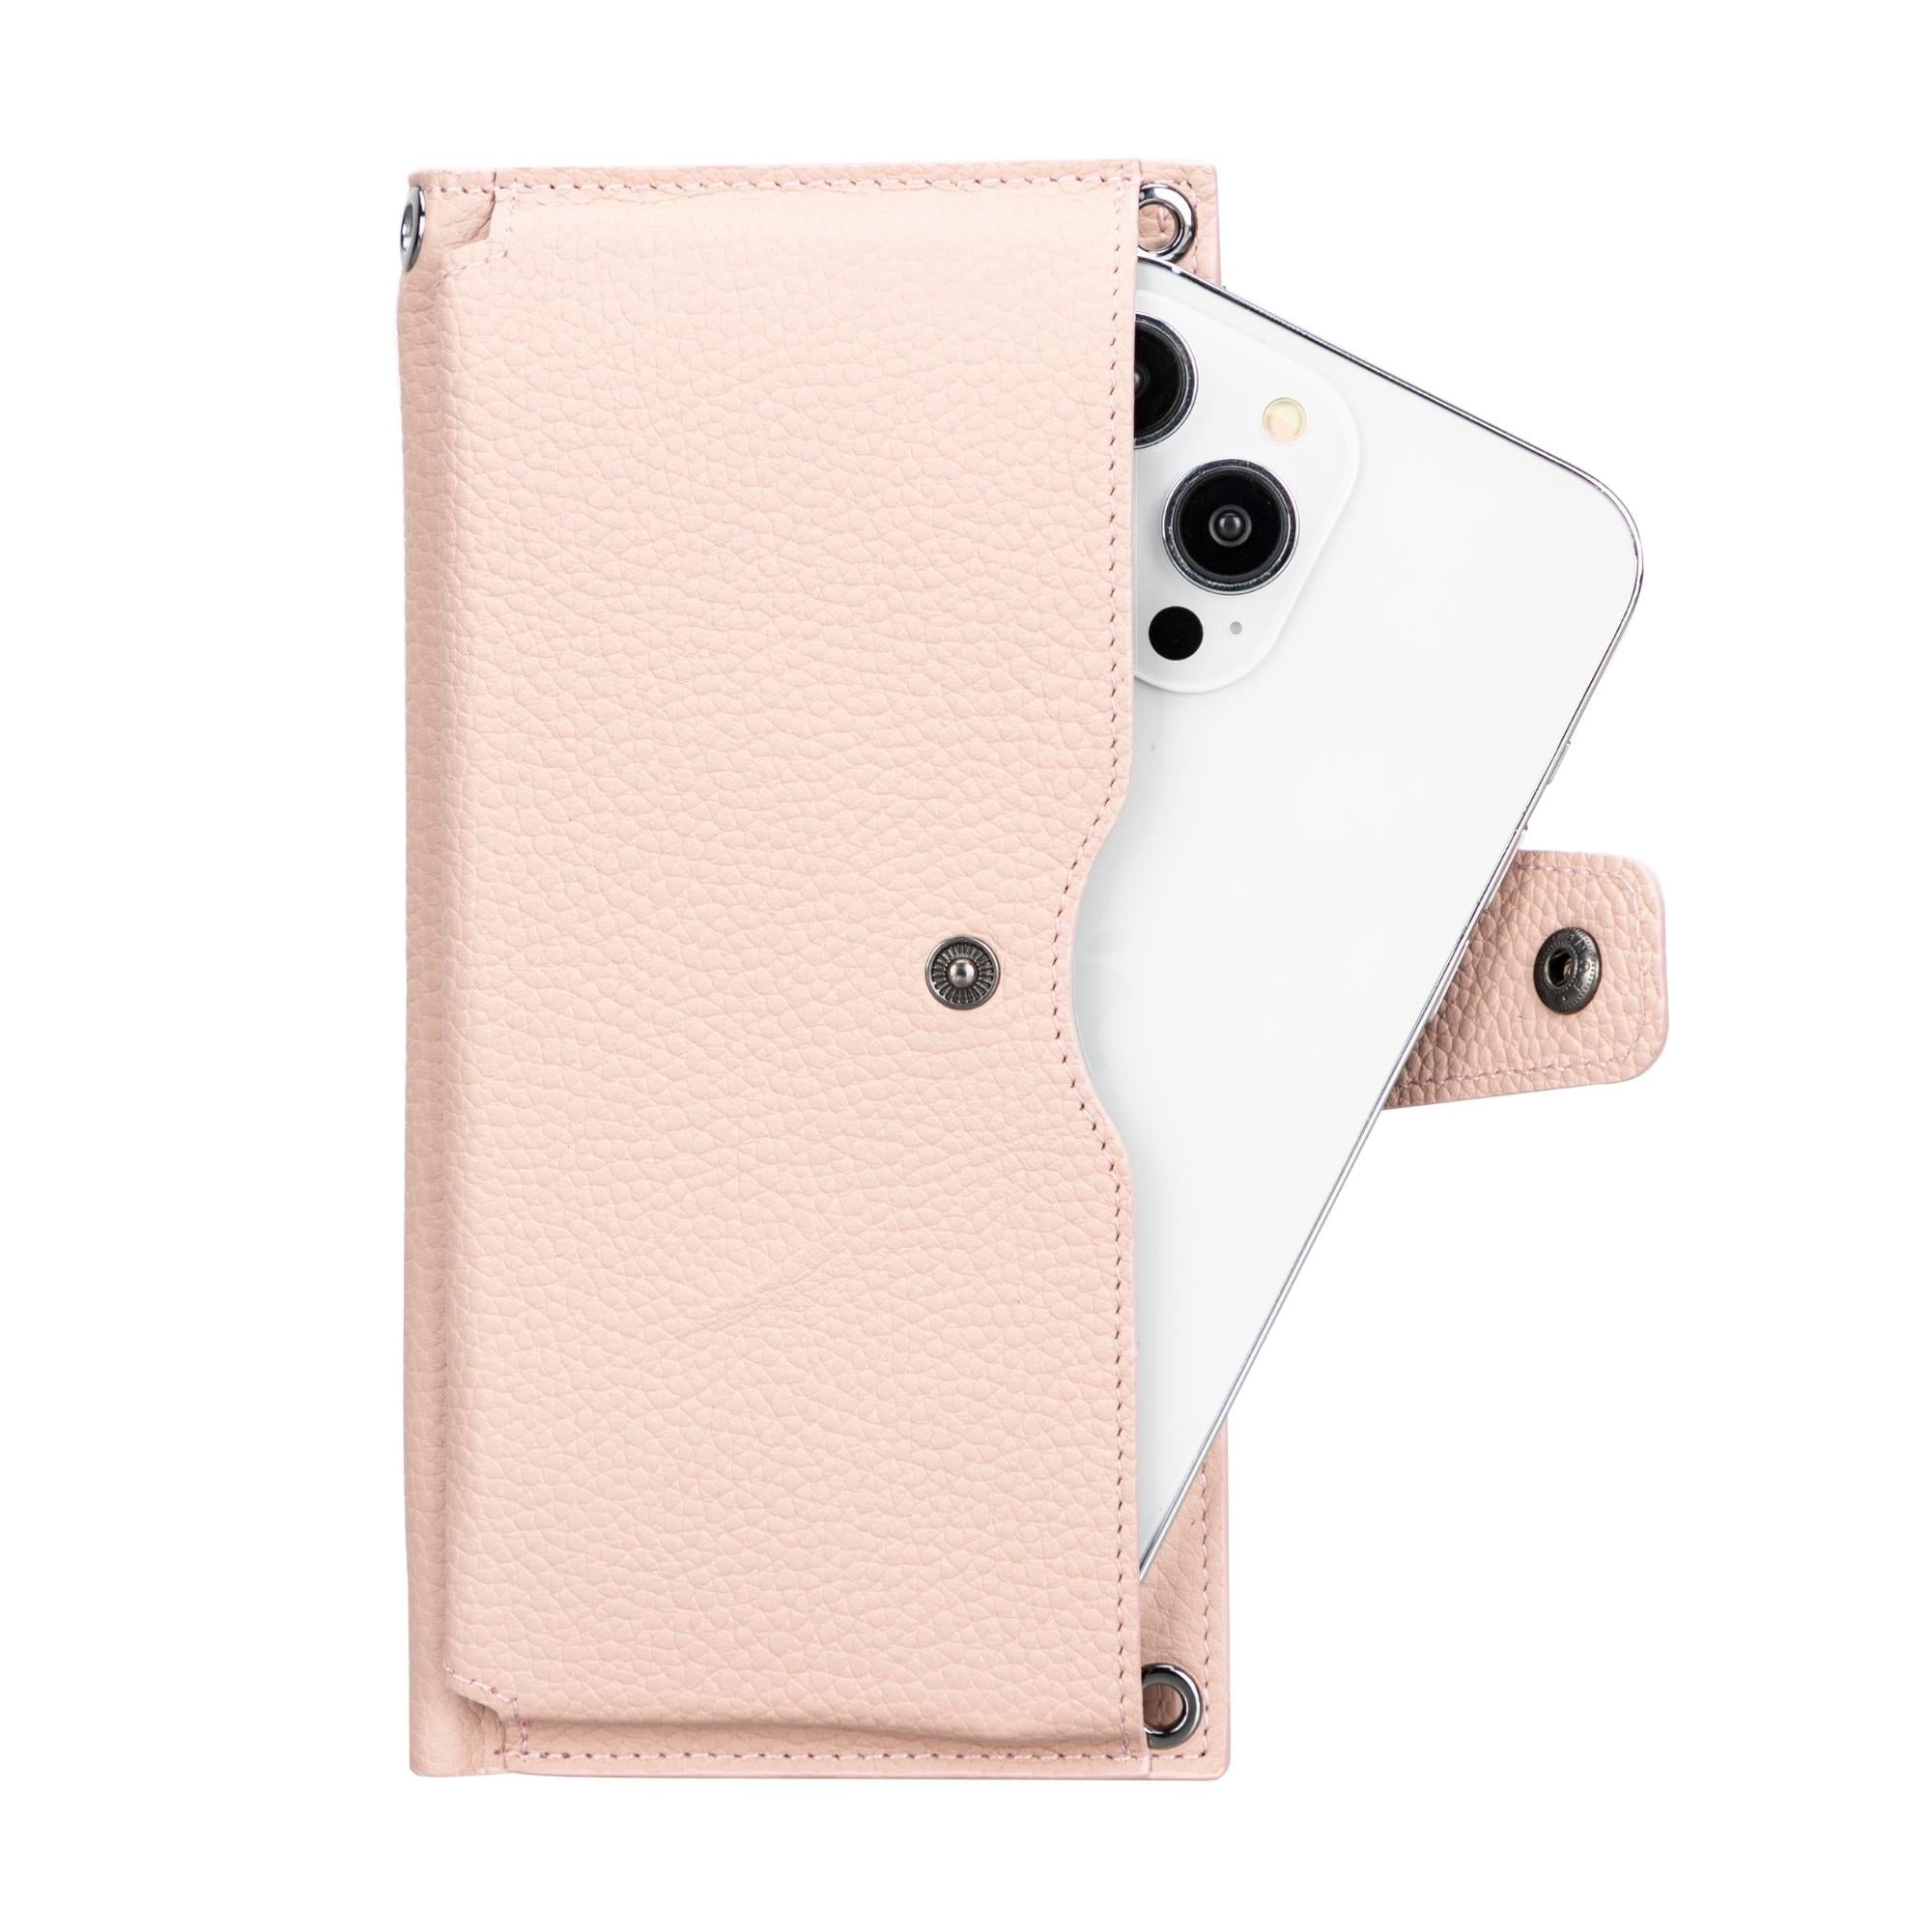 Kaycee Leather Women's Cell Phone Wallet with Strap - Pink - 6.9" - TORONATA